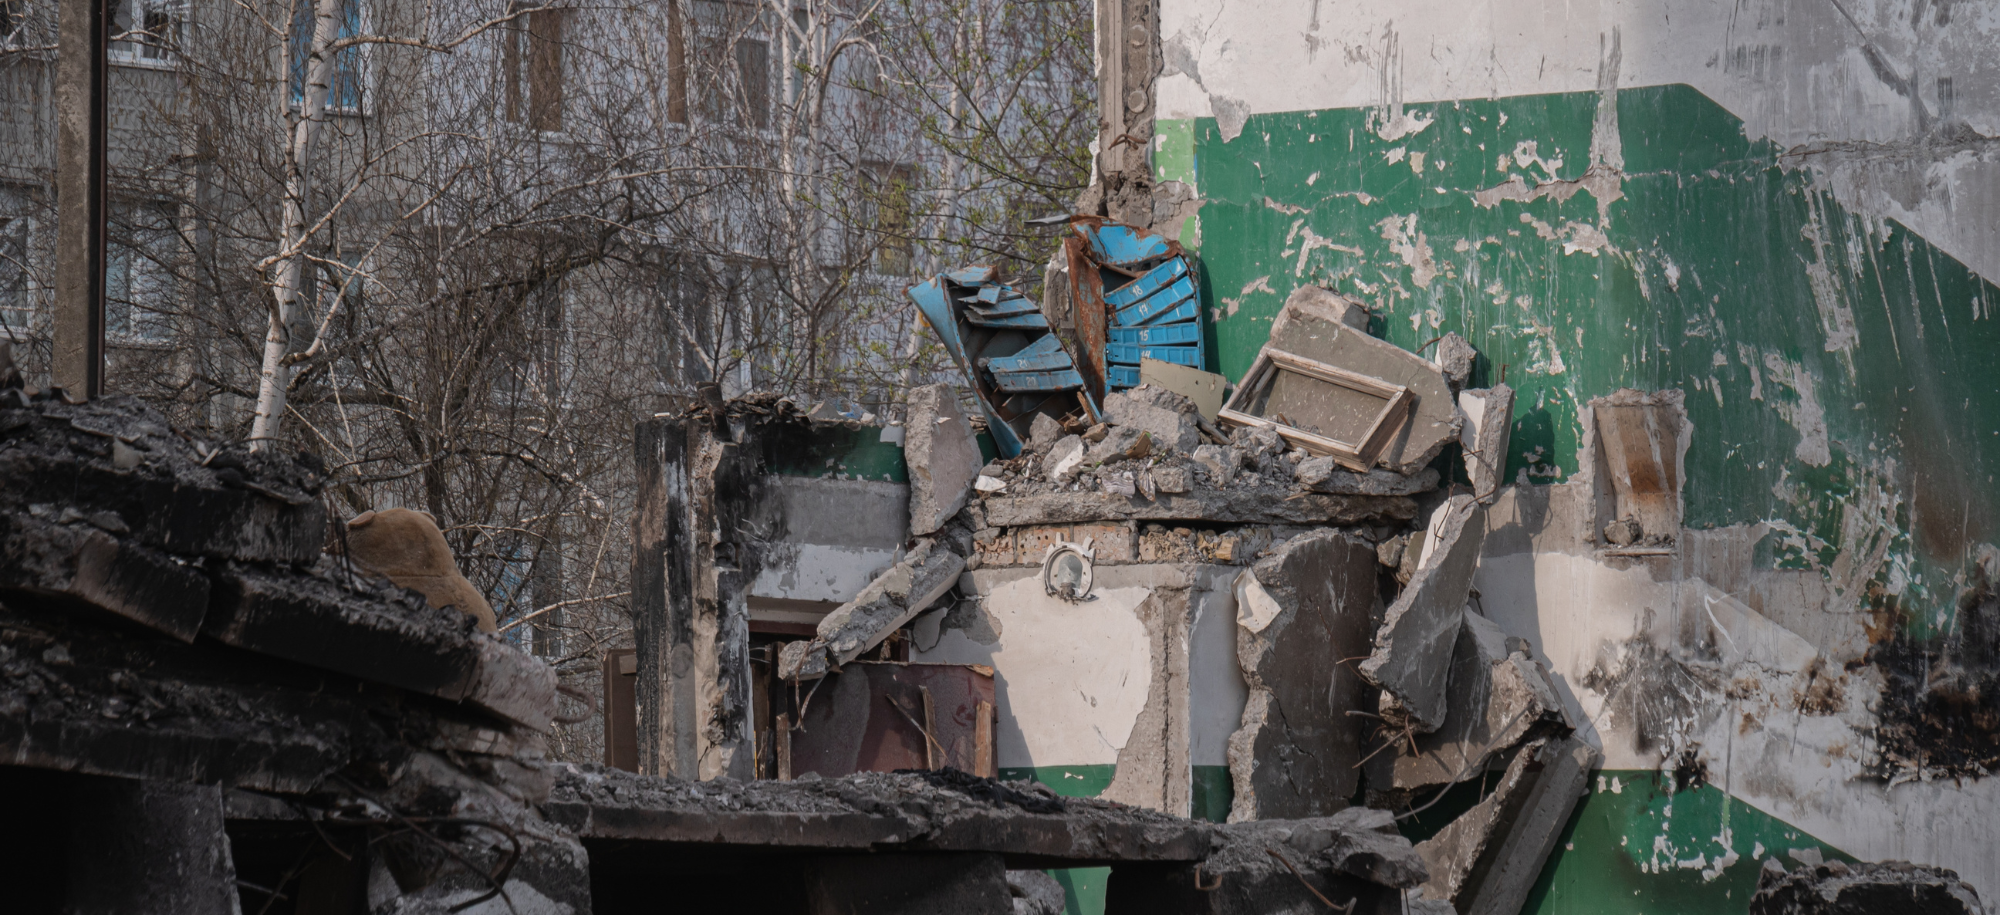 Image showing damage to buildings in the city of Odessa, Ukraine